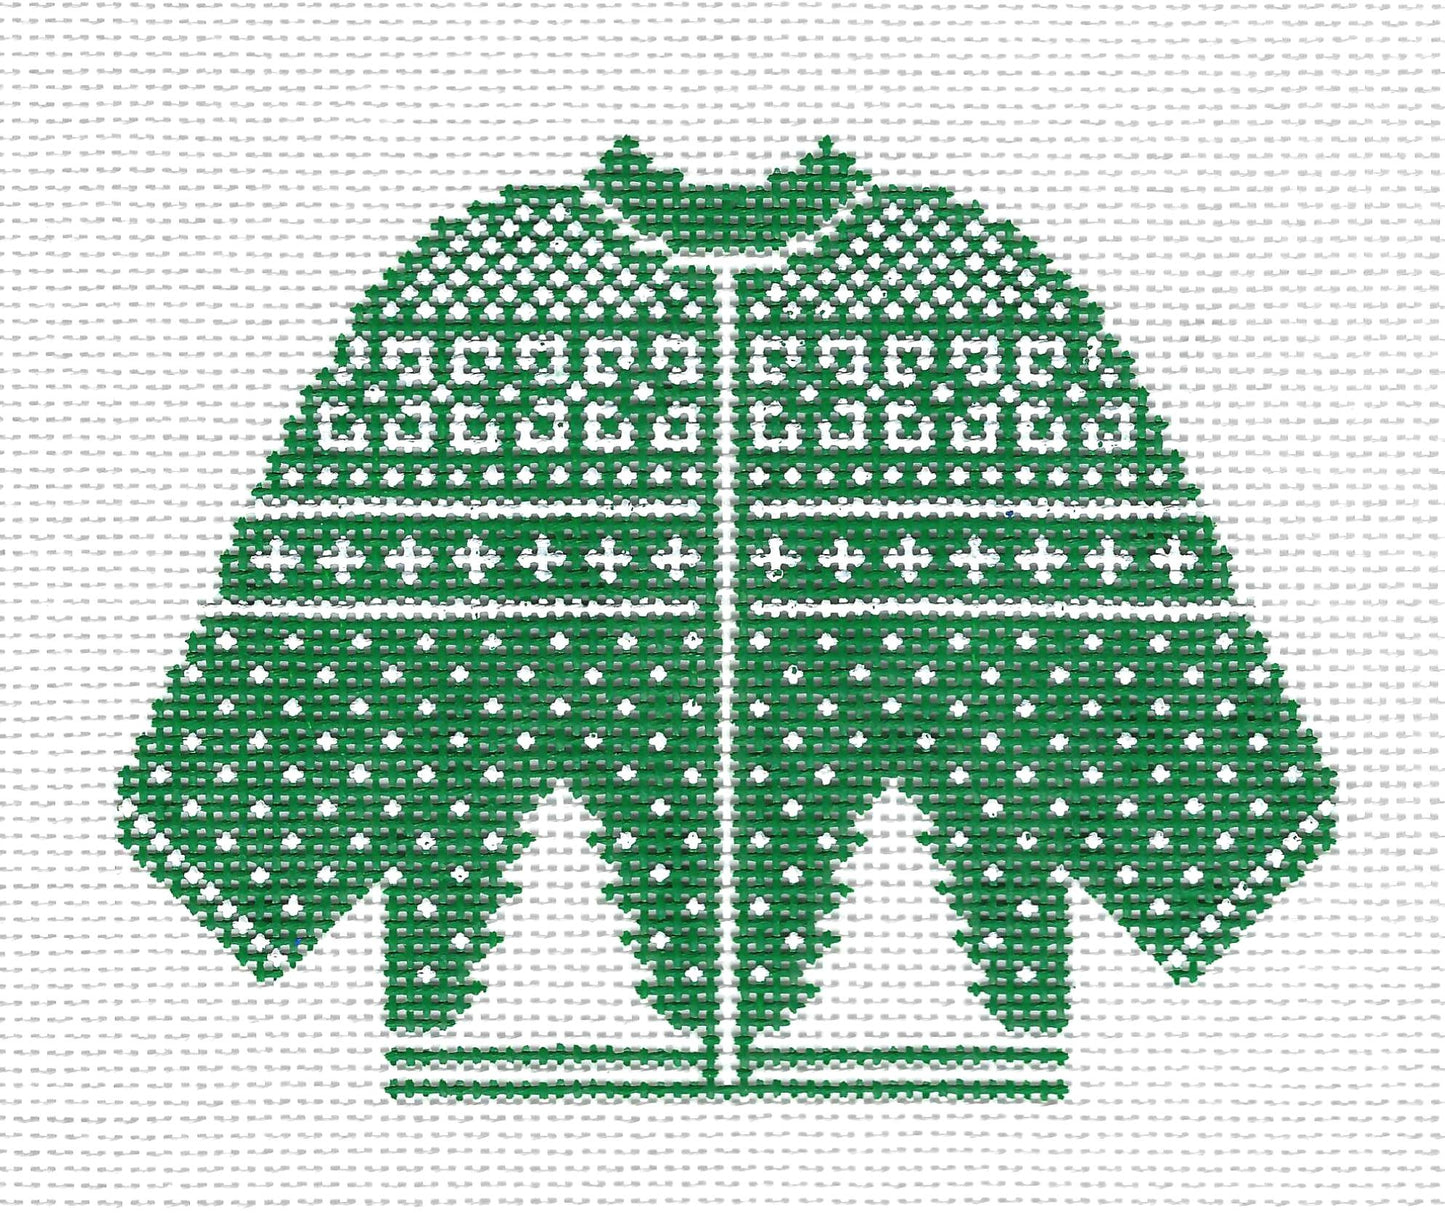 Sweater ~ Green & White Trees Cardigan Sweater Ornament by Silver Needle 13mesh handpainted Needlepoint Canvas by Silver Needle